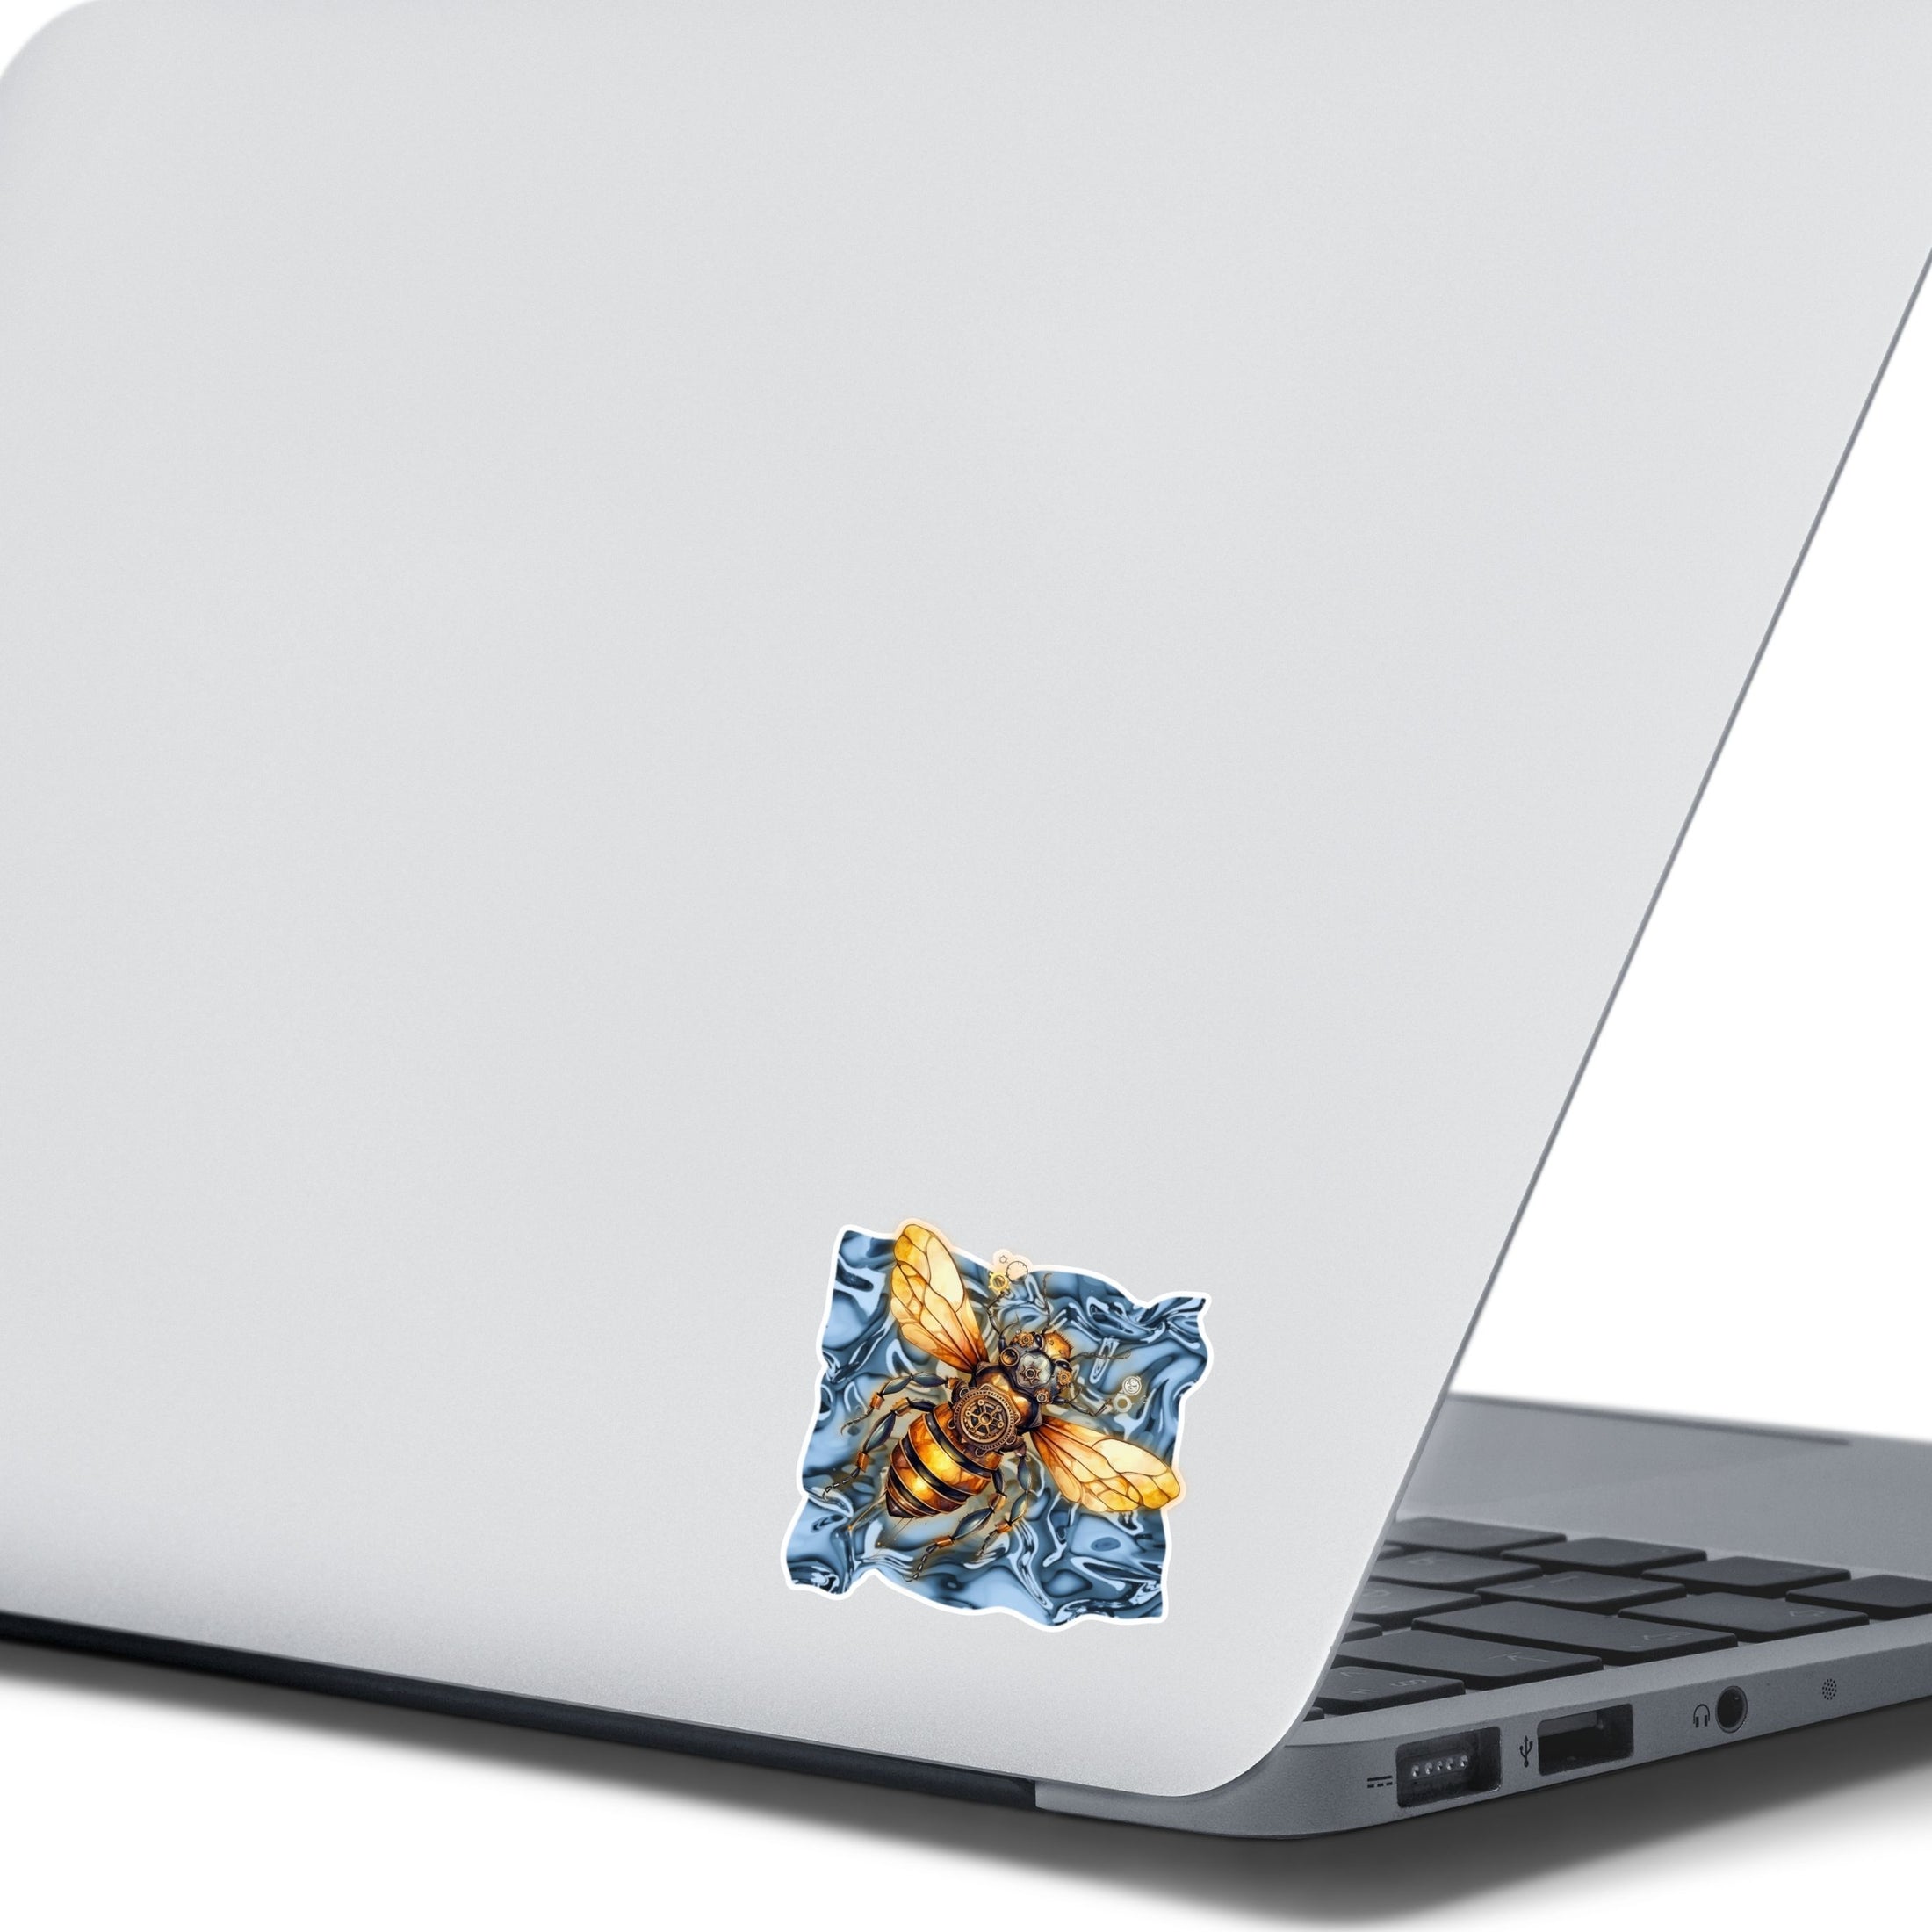 This image shows the steampunk bee sticker on the back of an open laptop.